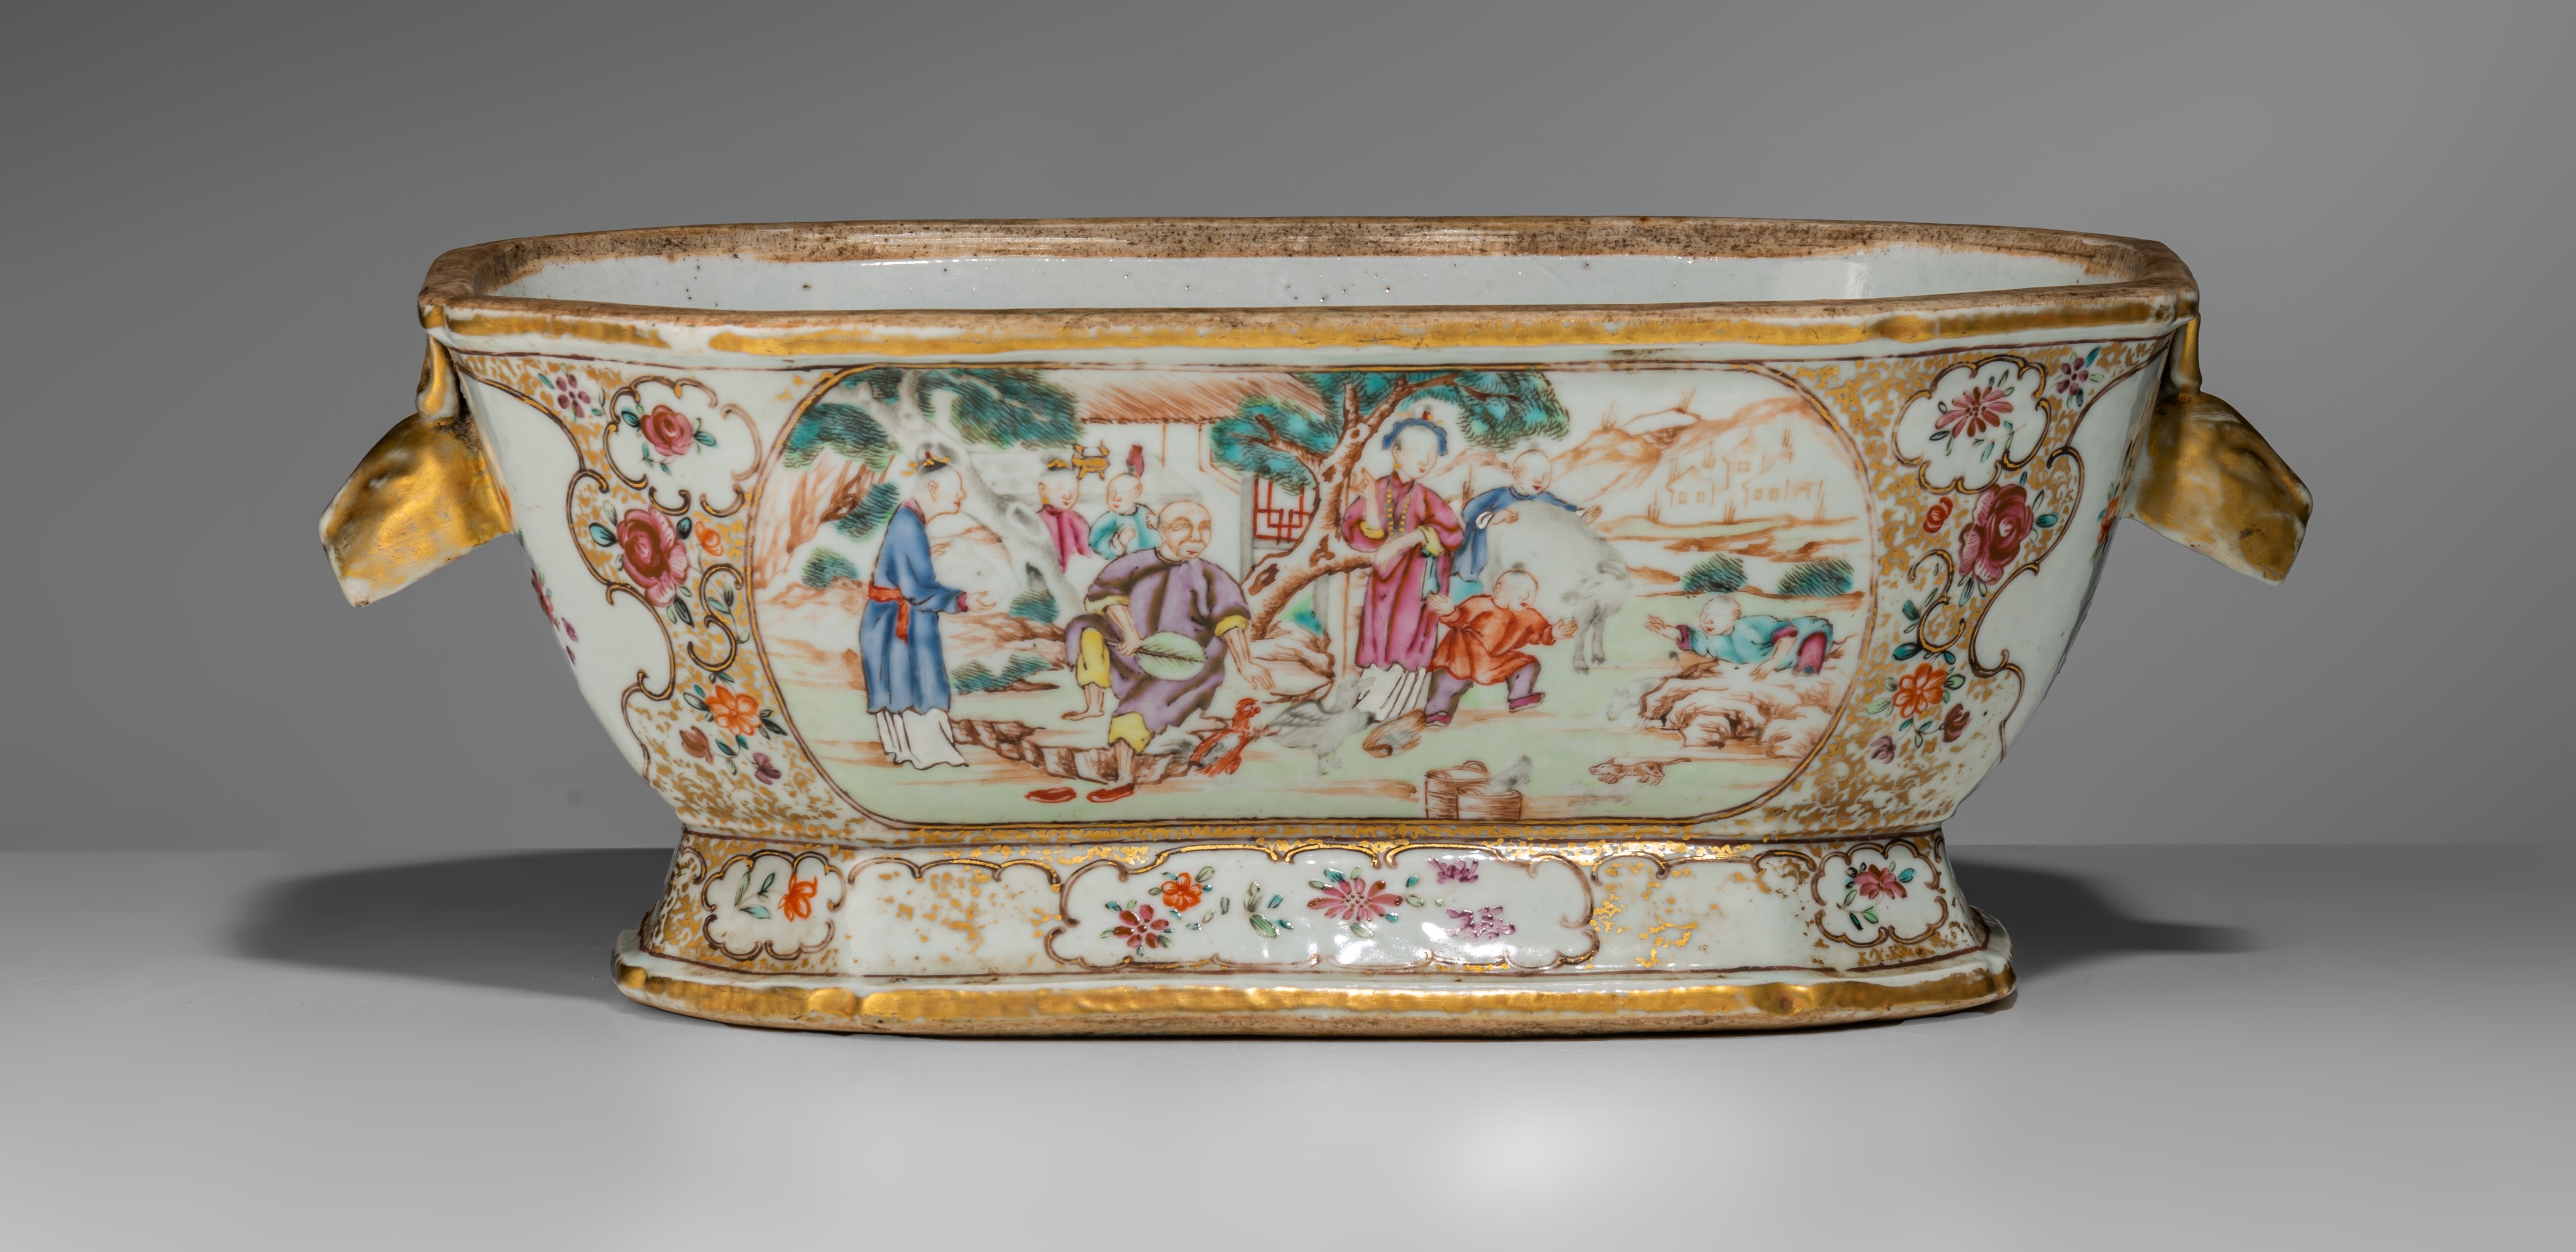 A collection of famille rose and gilt decorated export porcelain ware, 18thC, largest - H 12,5 - 34, - Image 8 of 20